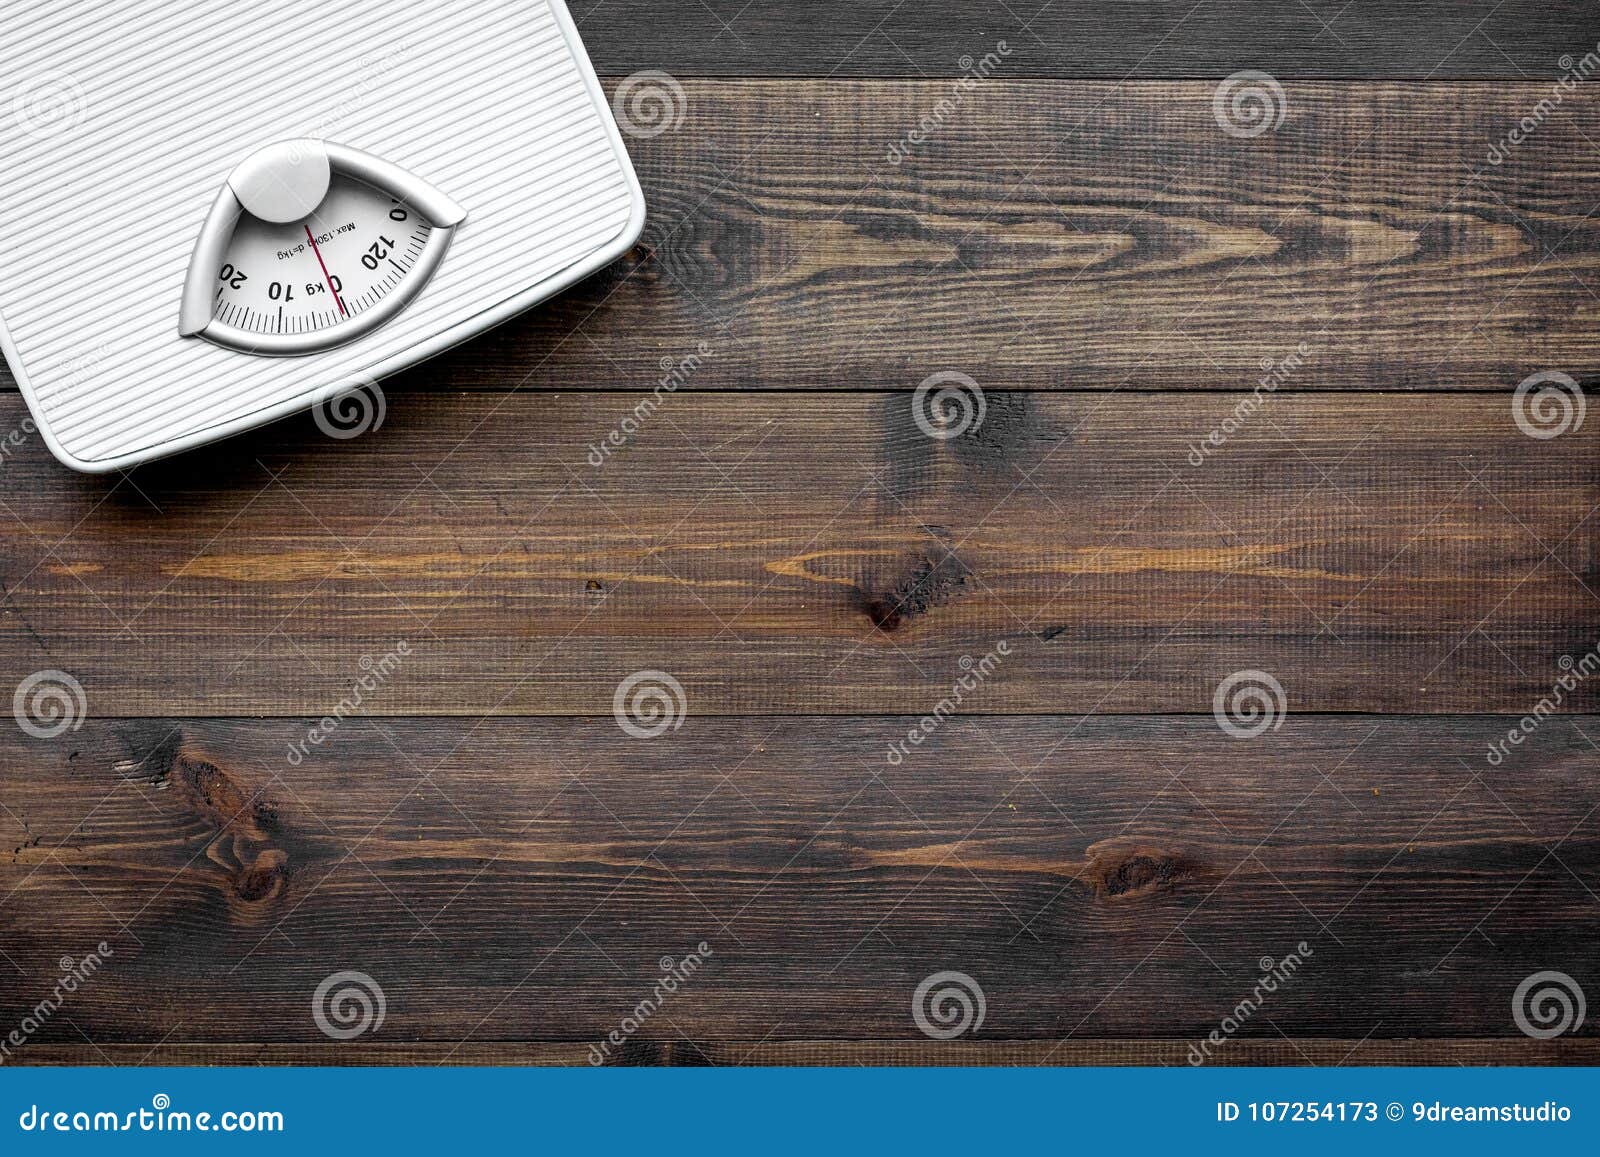 Weight loss accessories on wooden background, top view Stock Photo